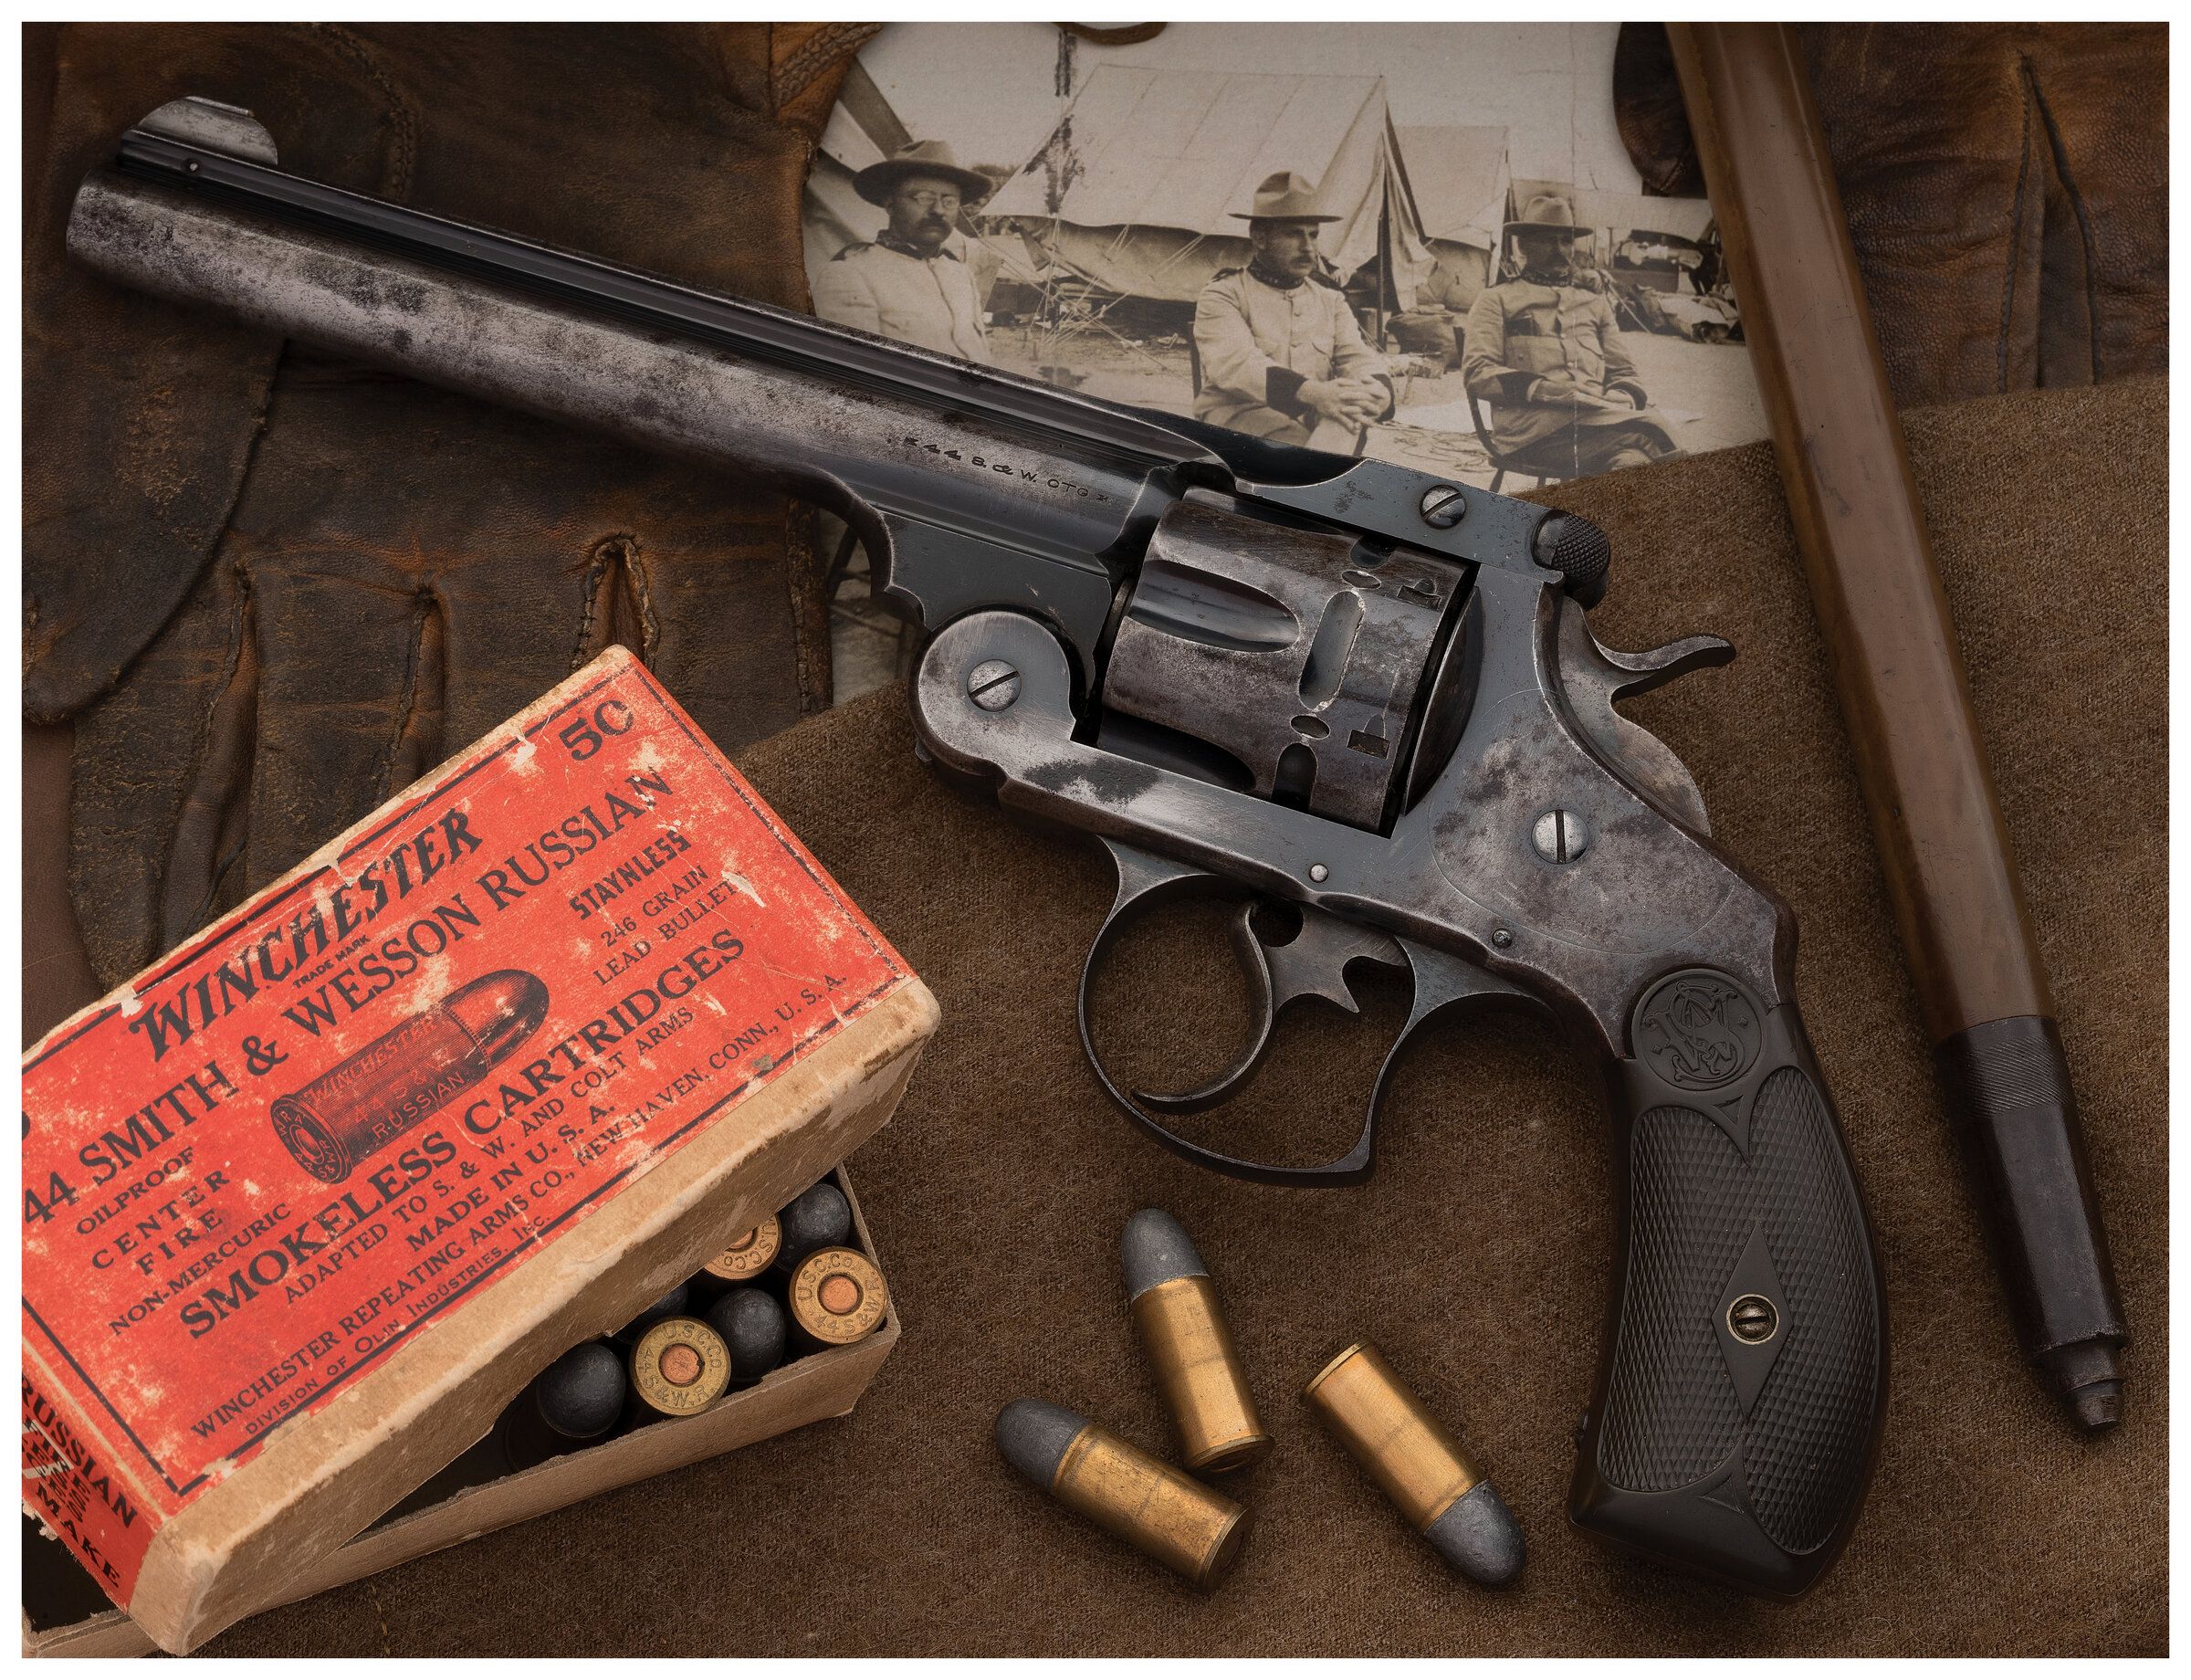 General Leonard Wood's Smith & Wesson .44 Double Action Revolver